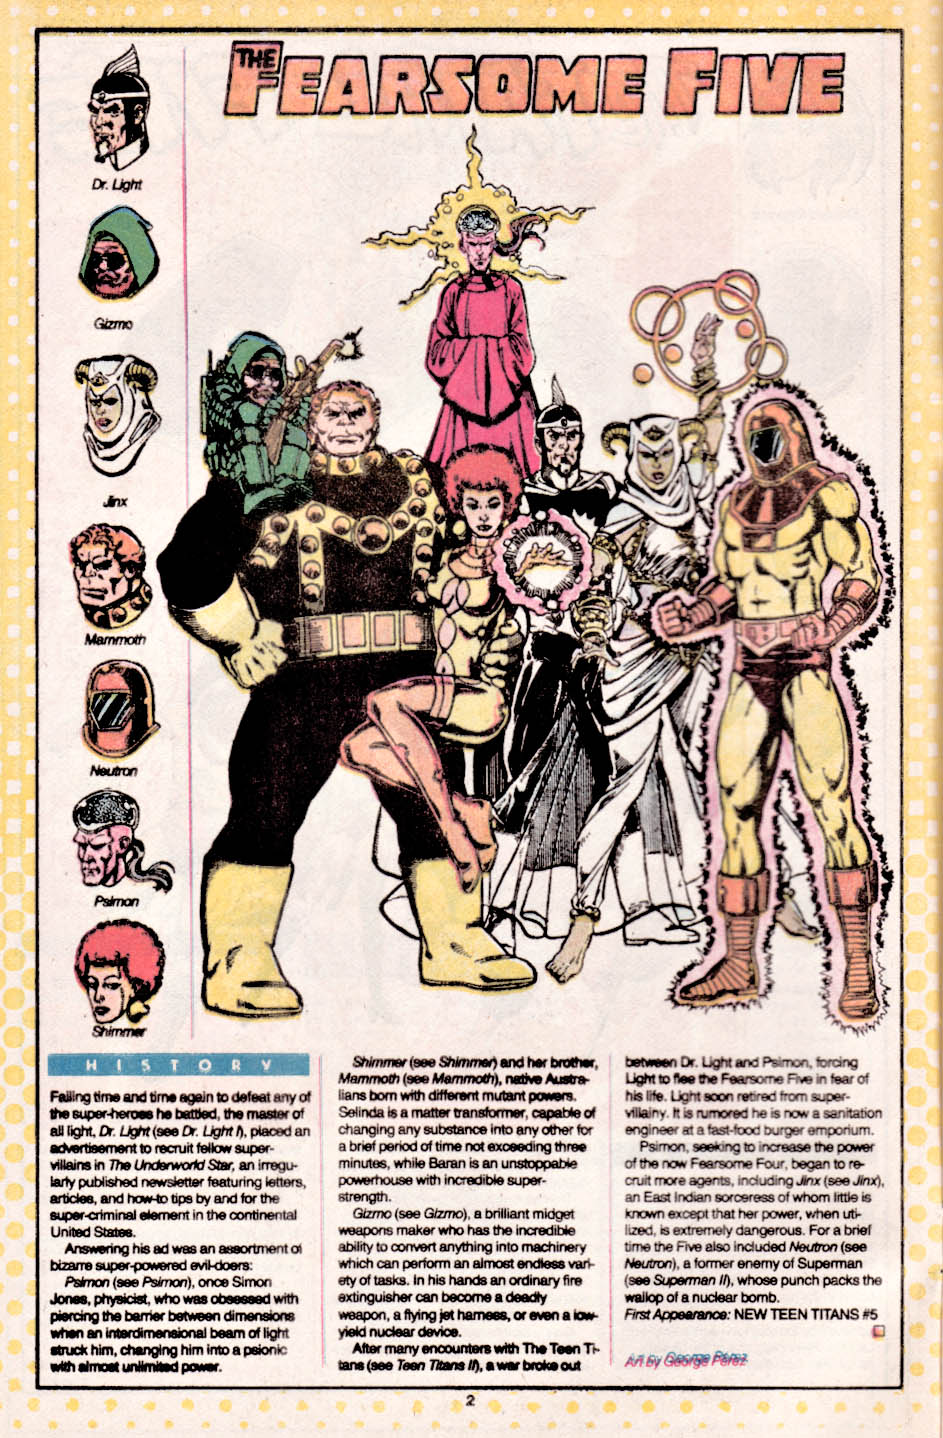 Fearsome Five by George Perez - Who's Who: The Definitive Directory of the DC Universe #8